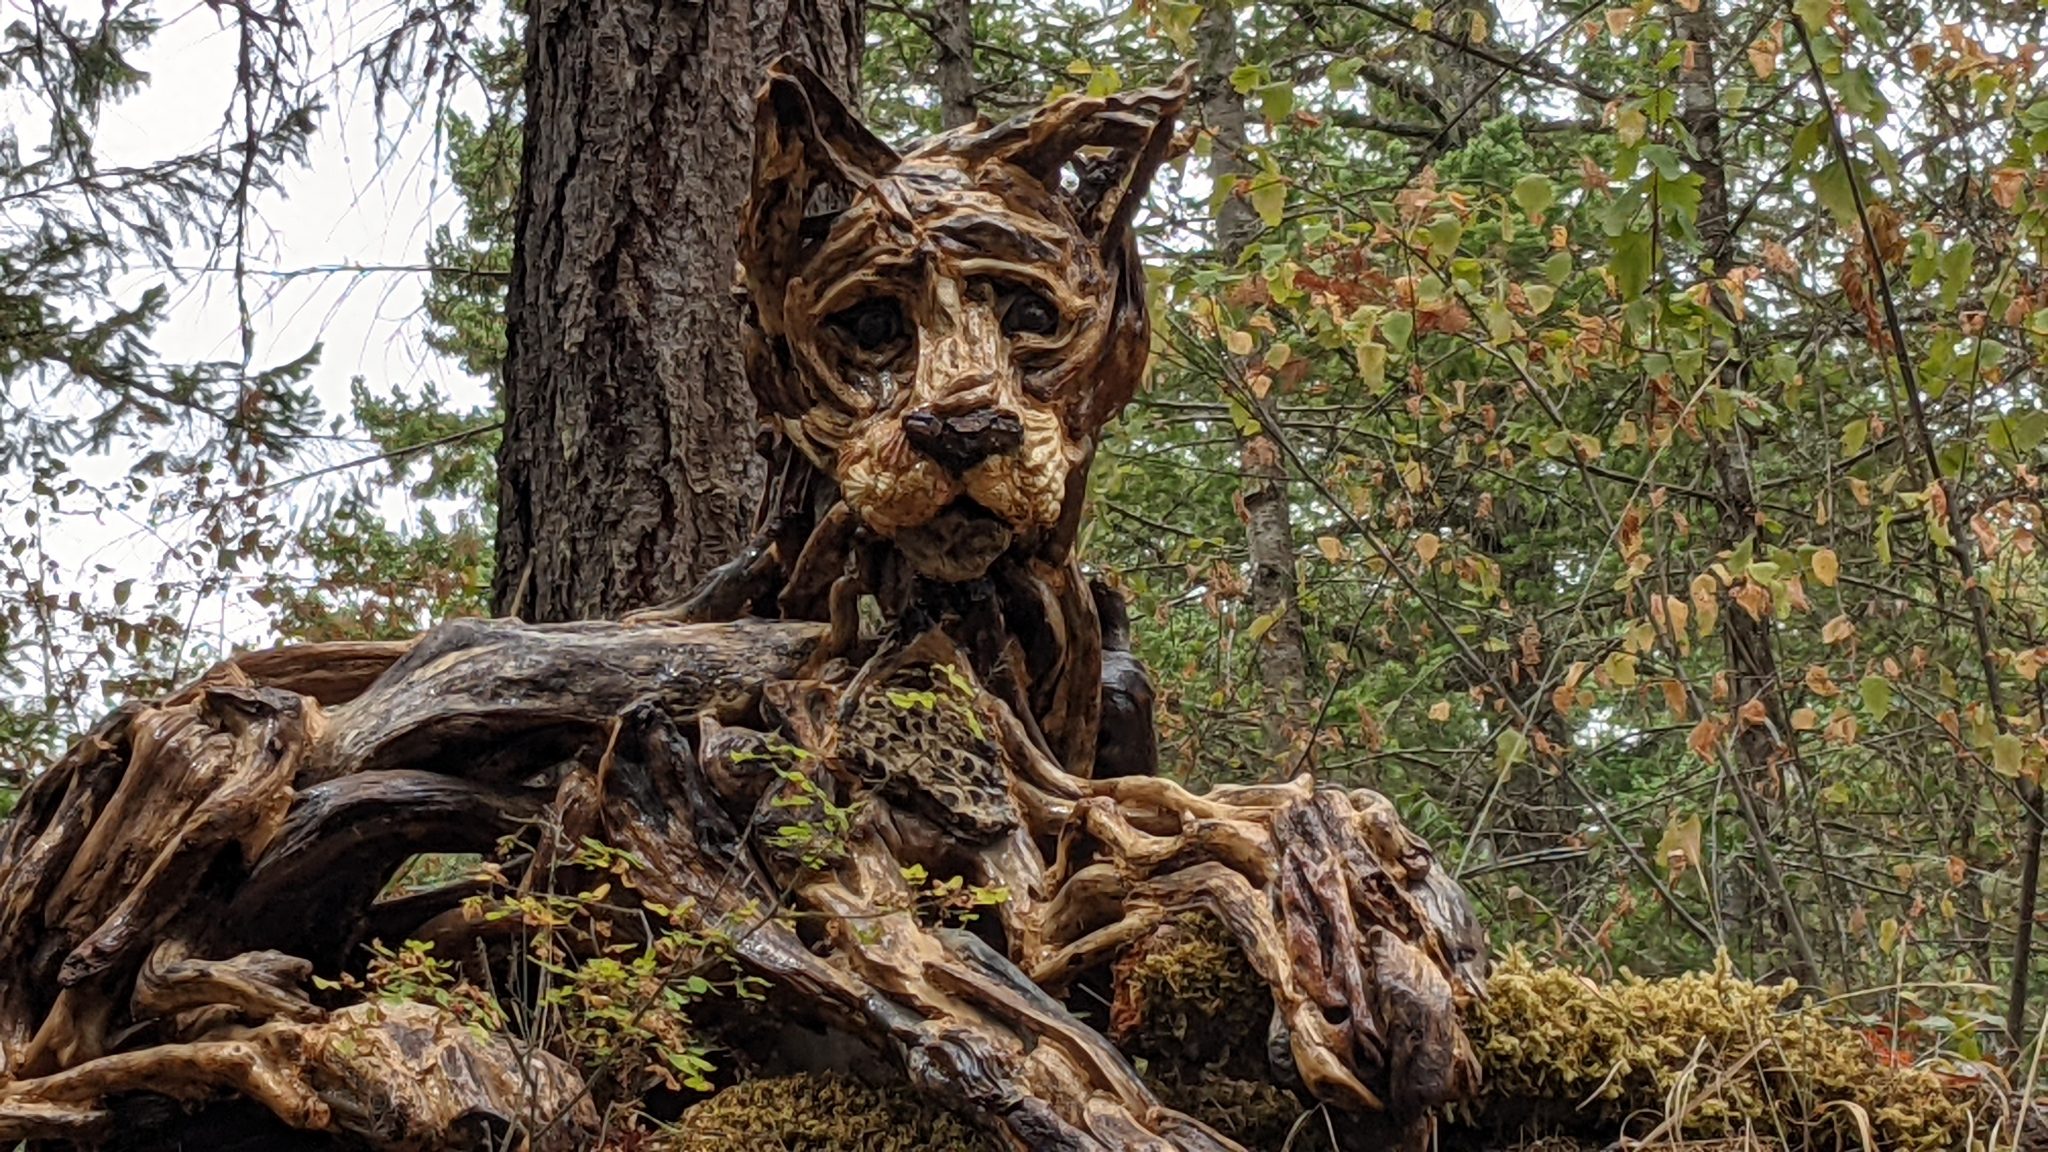 Driftwood sculpture of a cougar by Tanya Bub, located on the trail at the Malahat Skywalk on Vancouver Island British Columbia